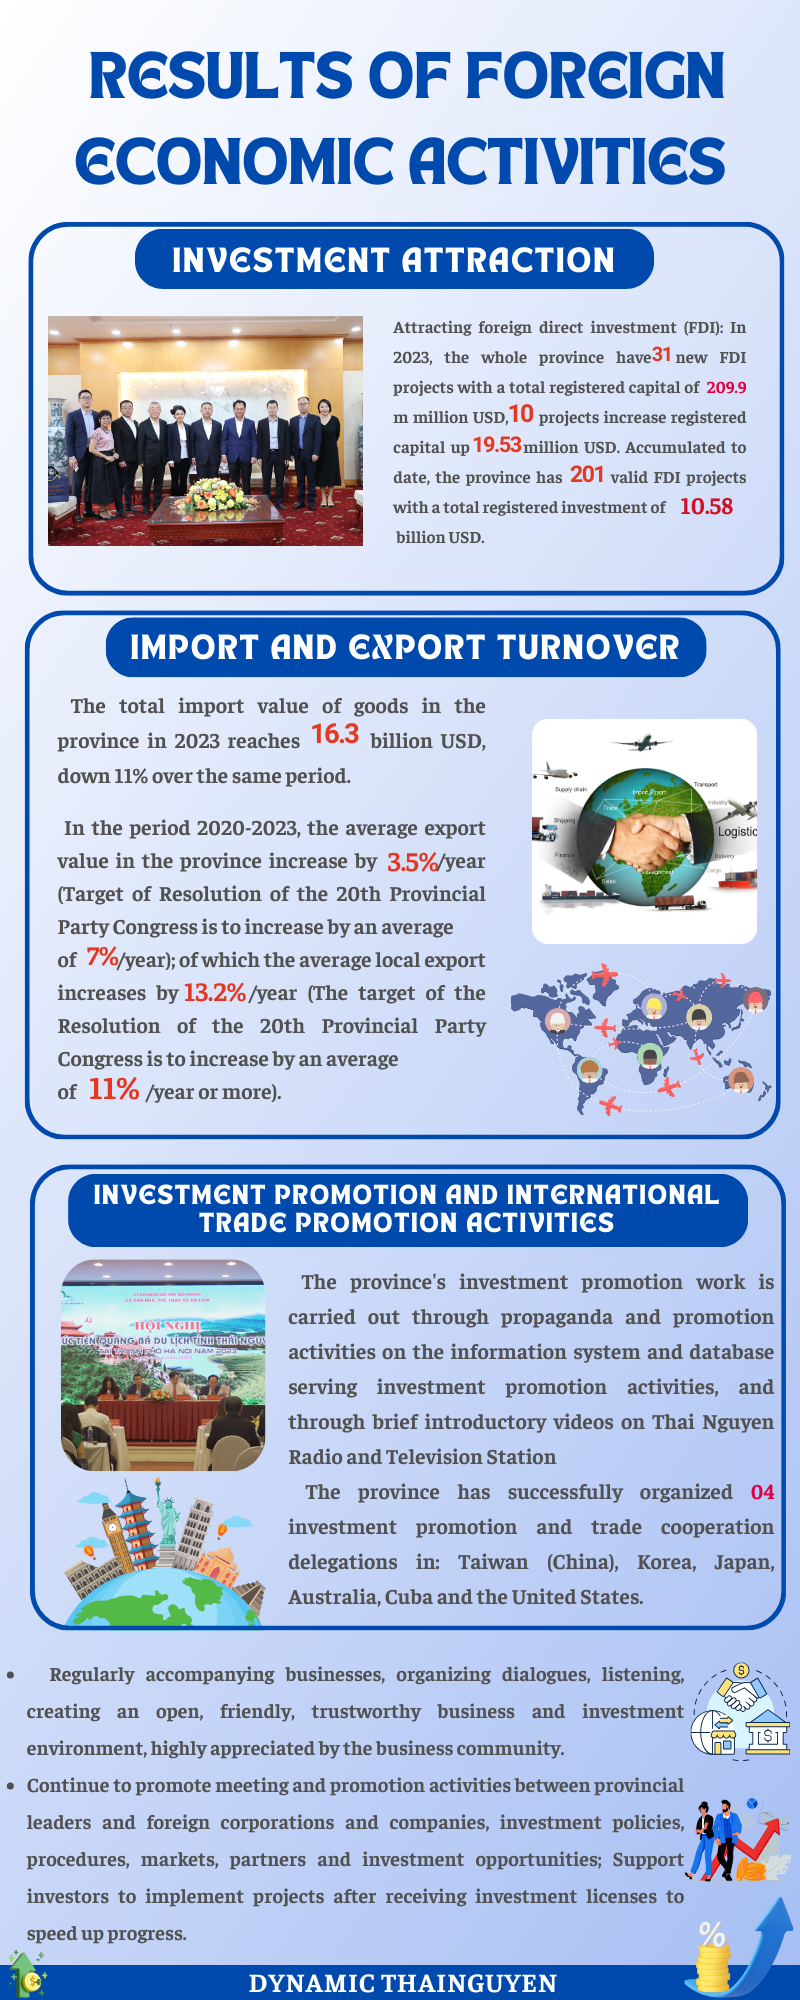 [INFOGRAPHIC] Results of foreign economic activities